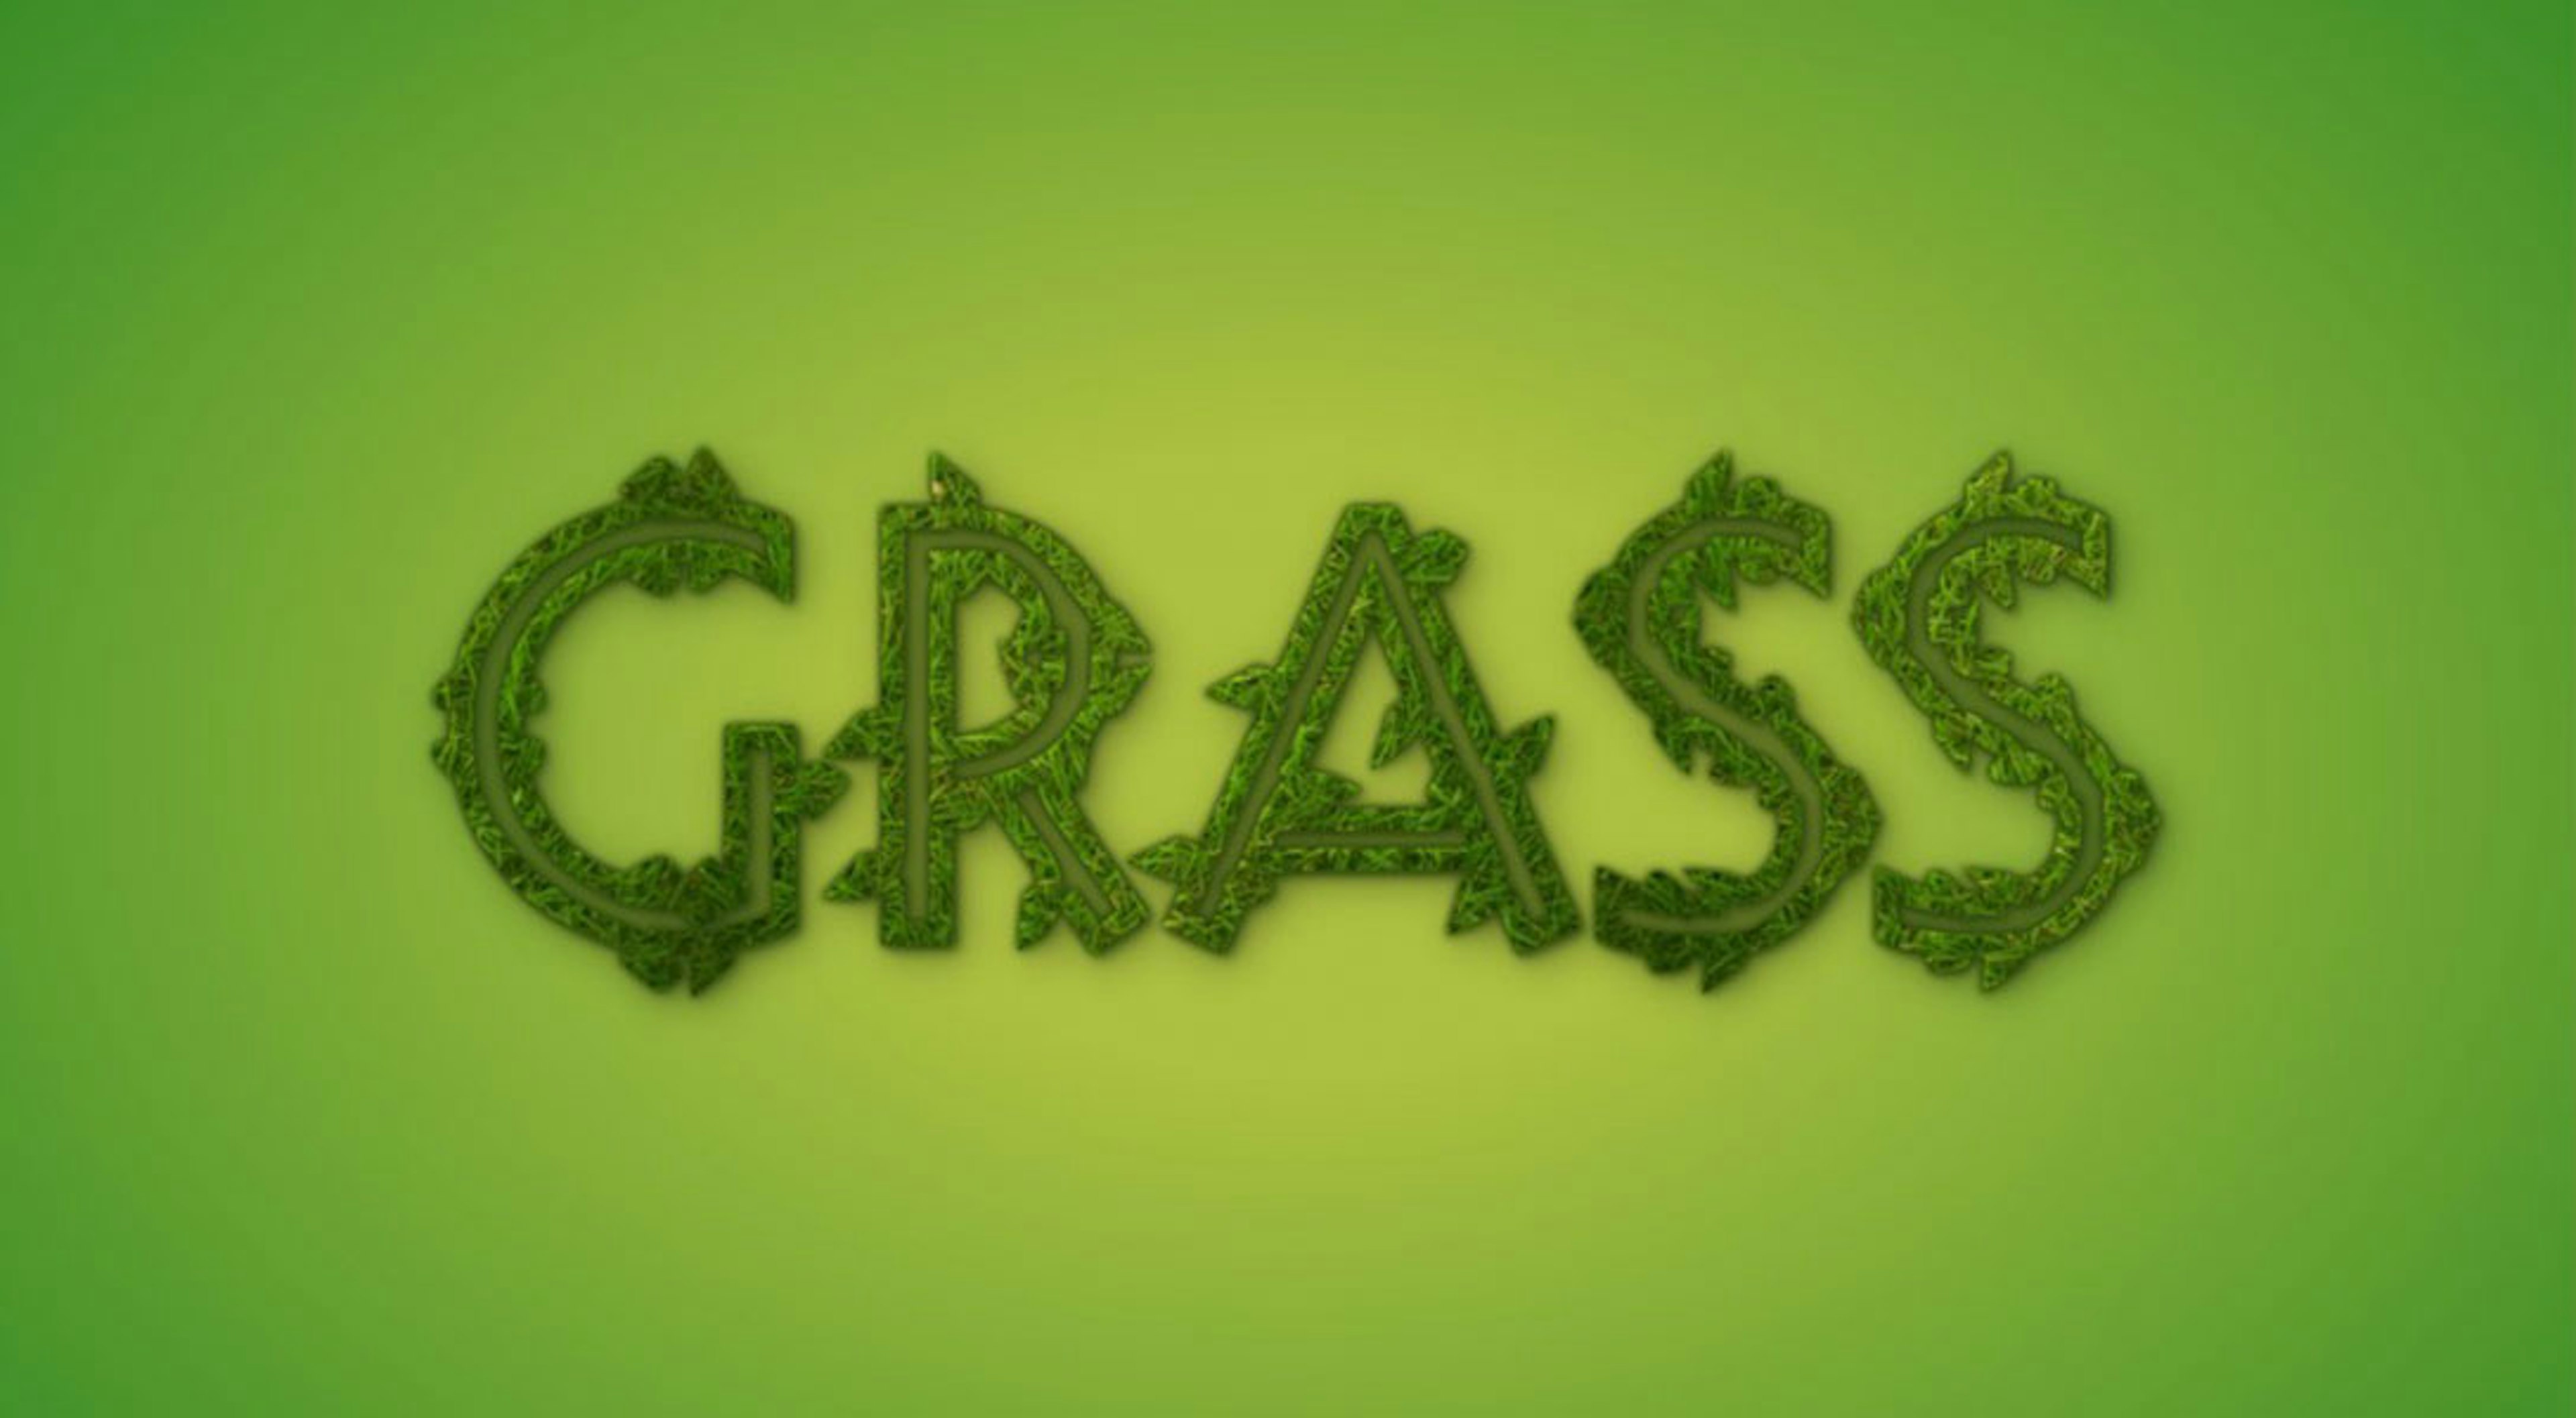 Screenshot of demo featuring decovar font styled to look like its growing leaves like grass or tree